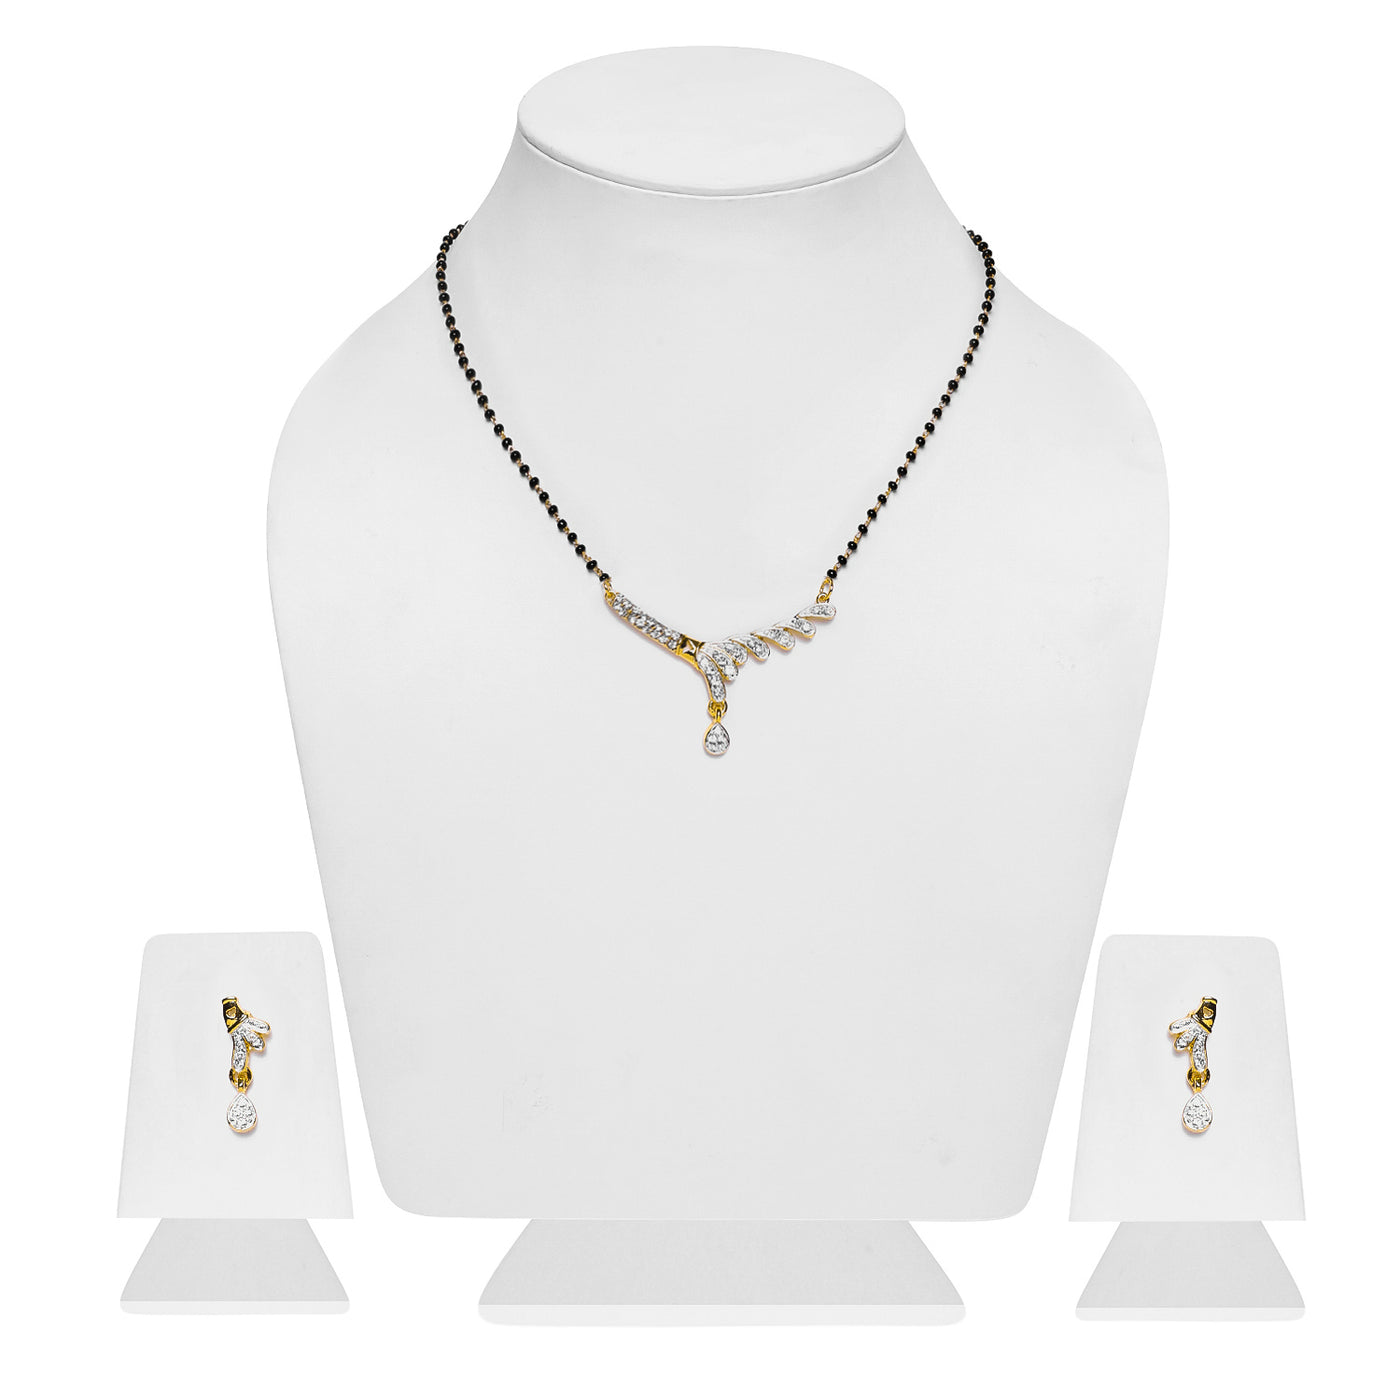 Estele Gold Plated Magnificent Mangalsutra Necklace Set with Austrian Crystals for Women